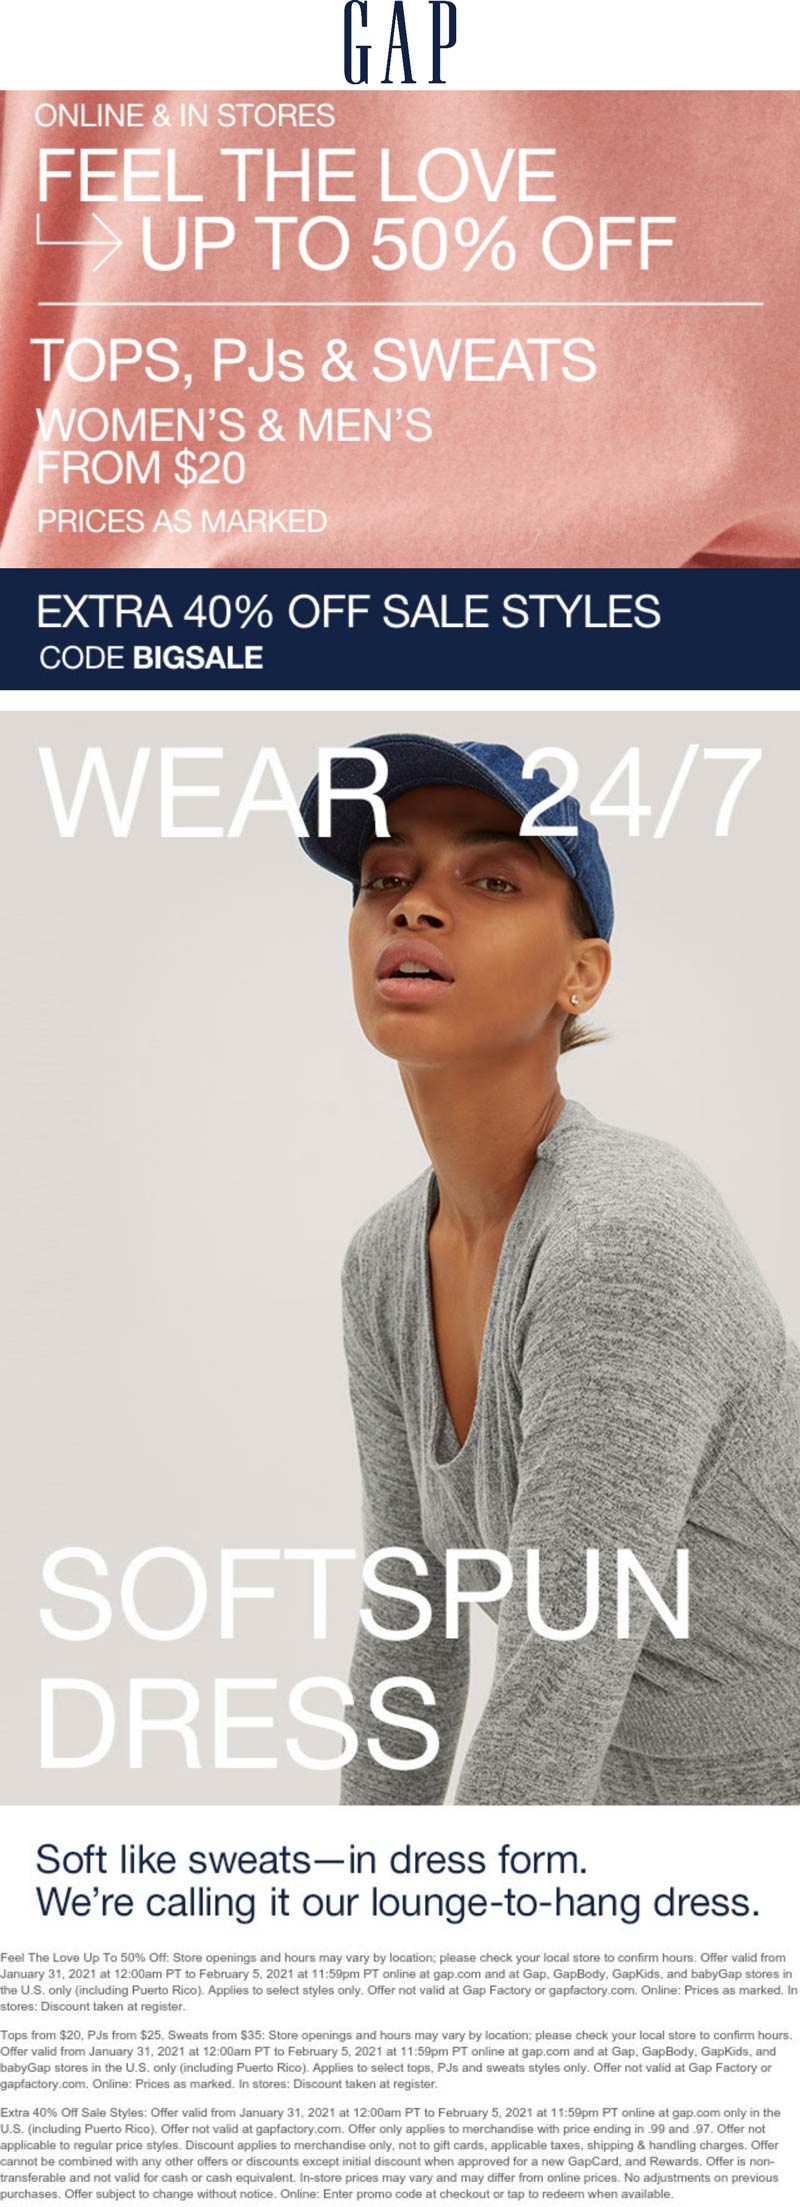 Gap stores Coupon  Extra 40% off sale styles online at Gap via promo code BIGSALE #gap 